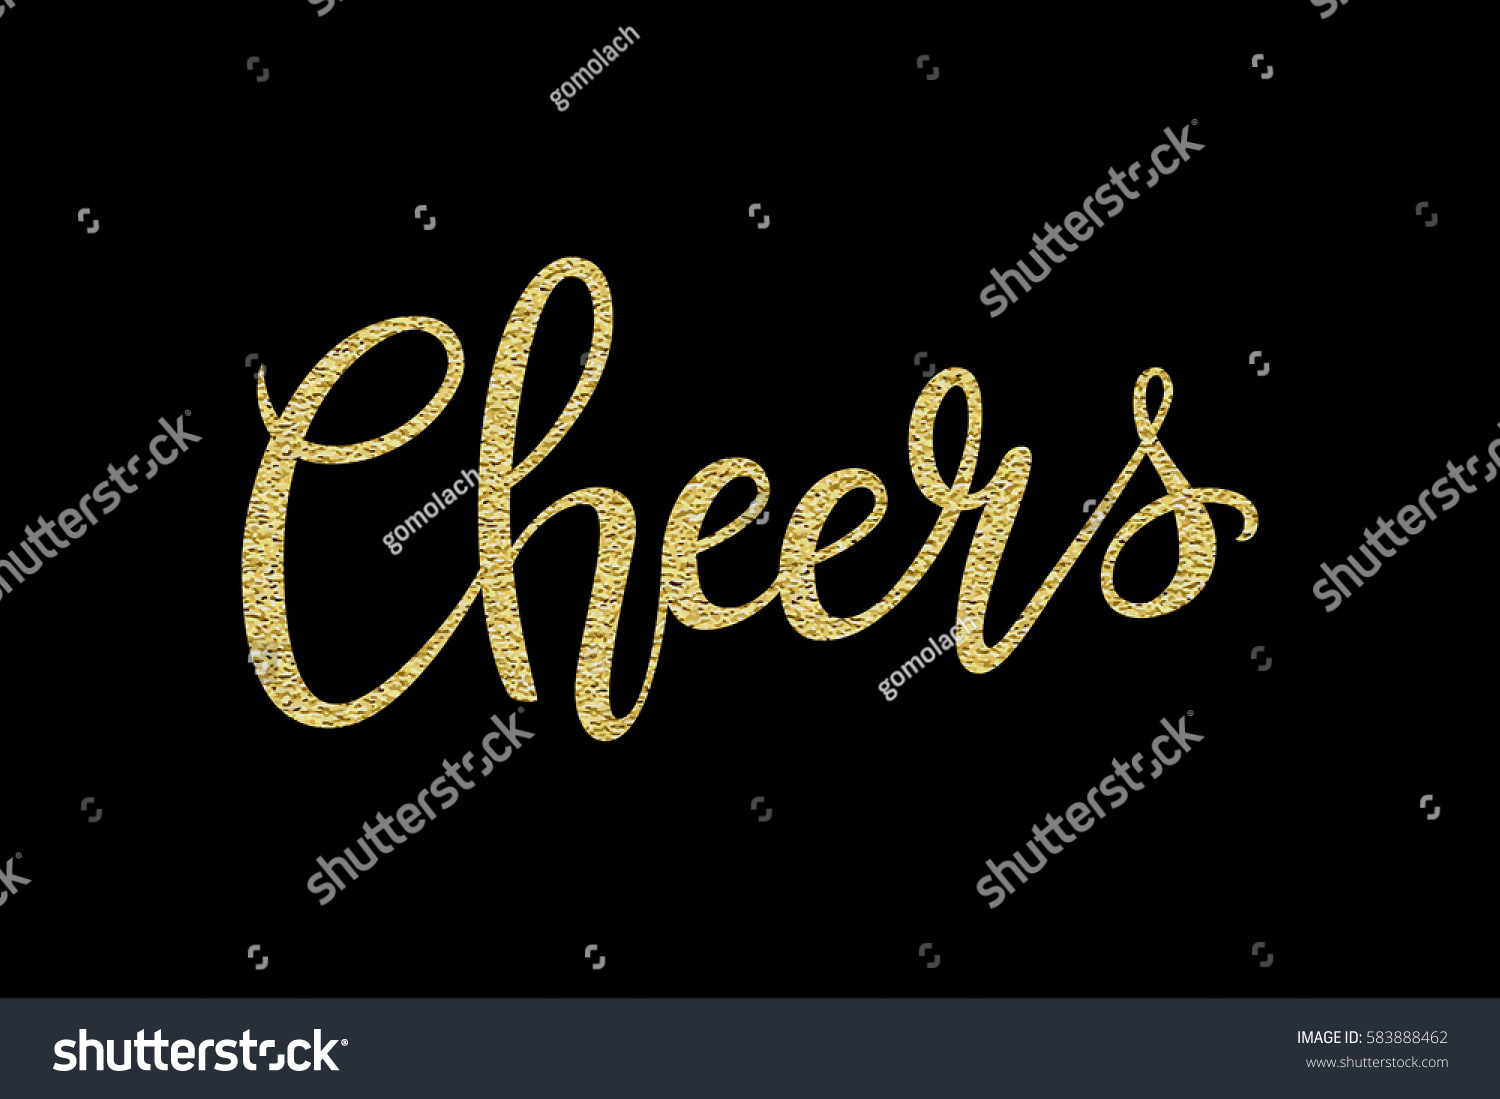 SVG of Cheers hand-drawn lettering decoration text with gold sparkles on black background. Design template for greeting cards, invitations, banners, gifts, prints and posters. Calligraphic inscription. svg